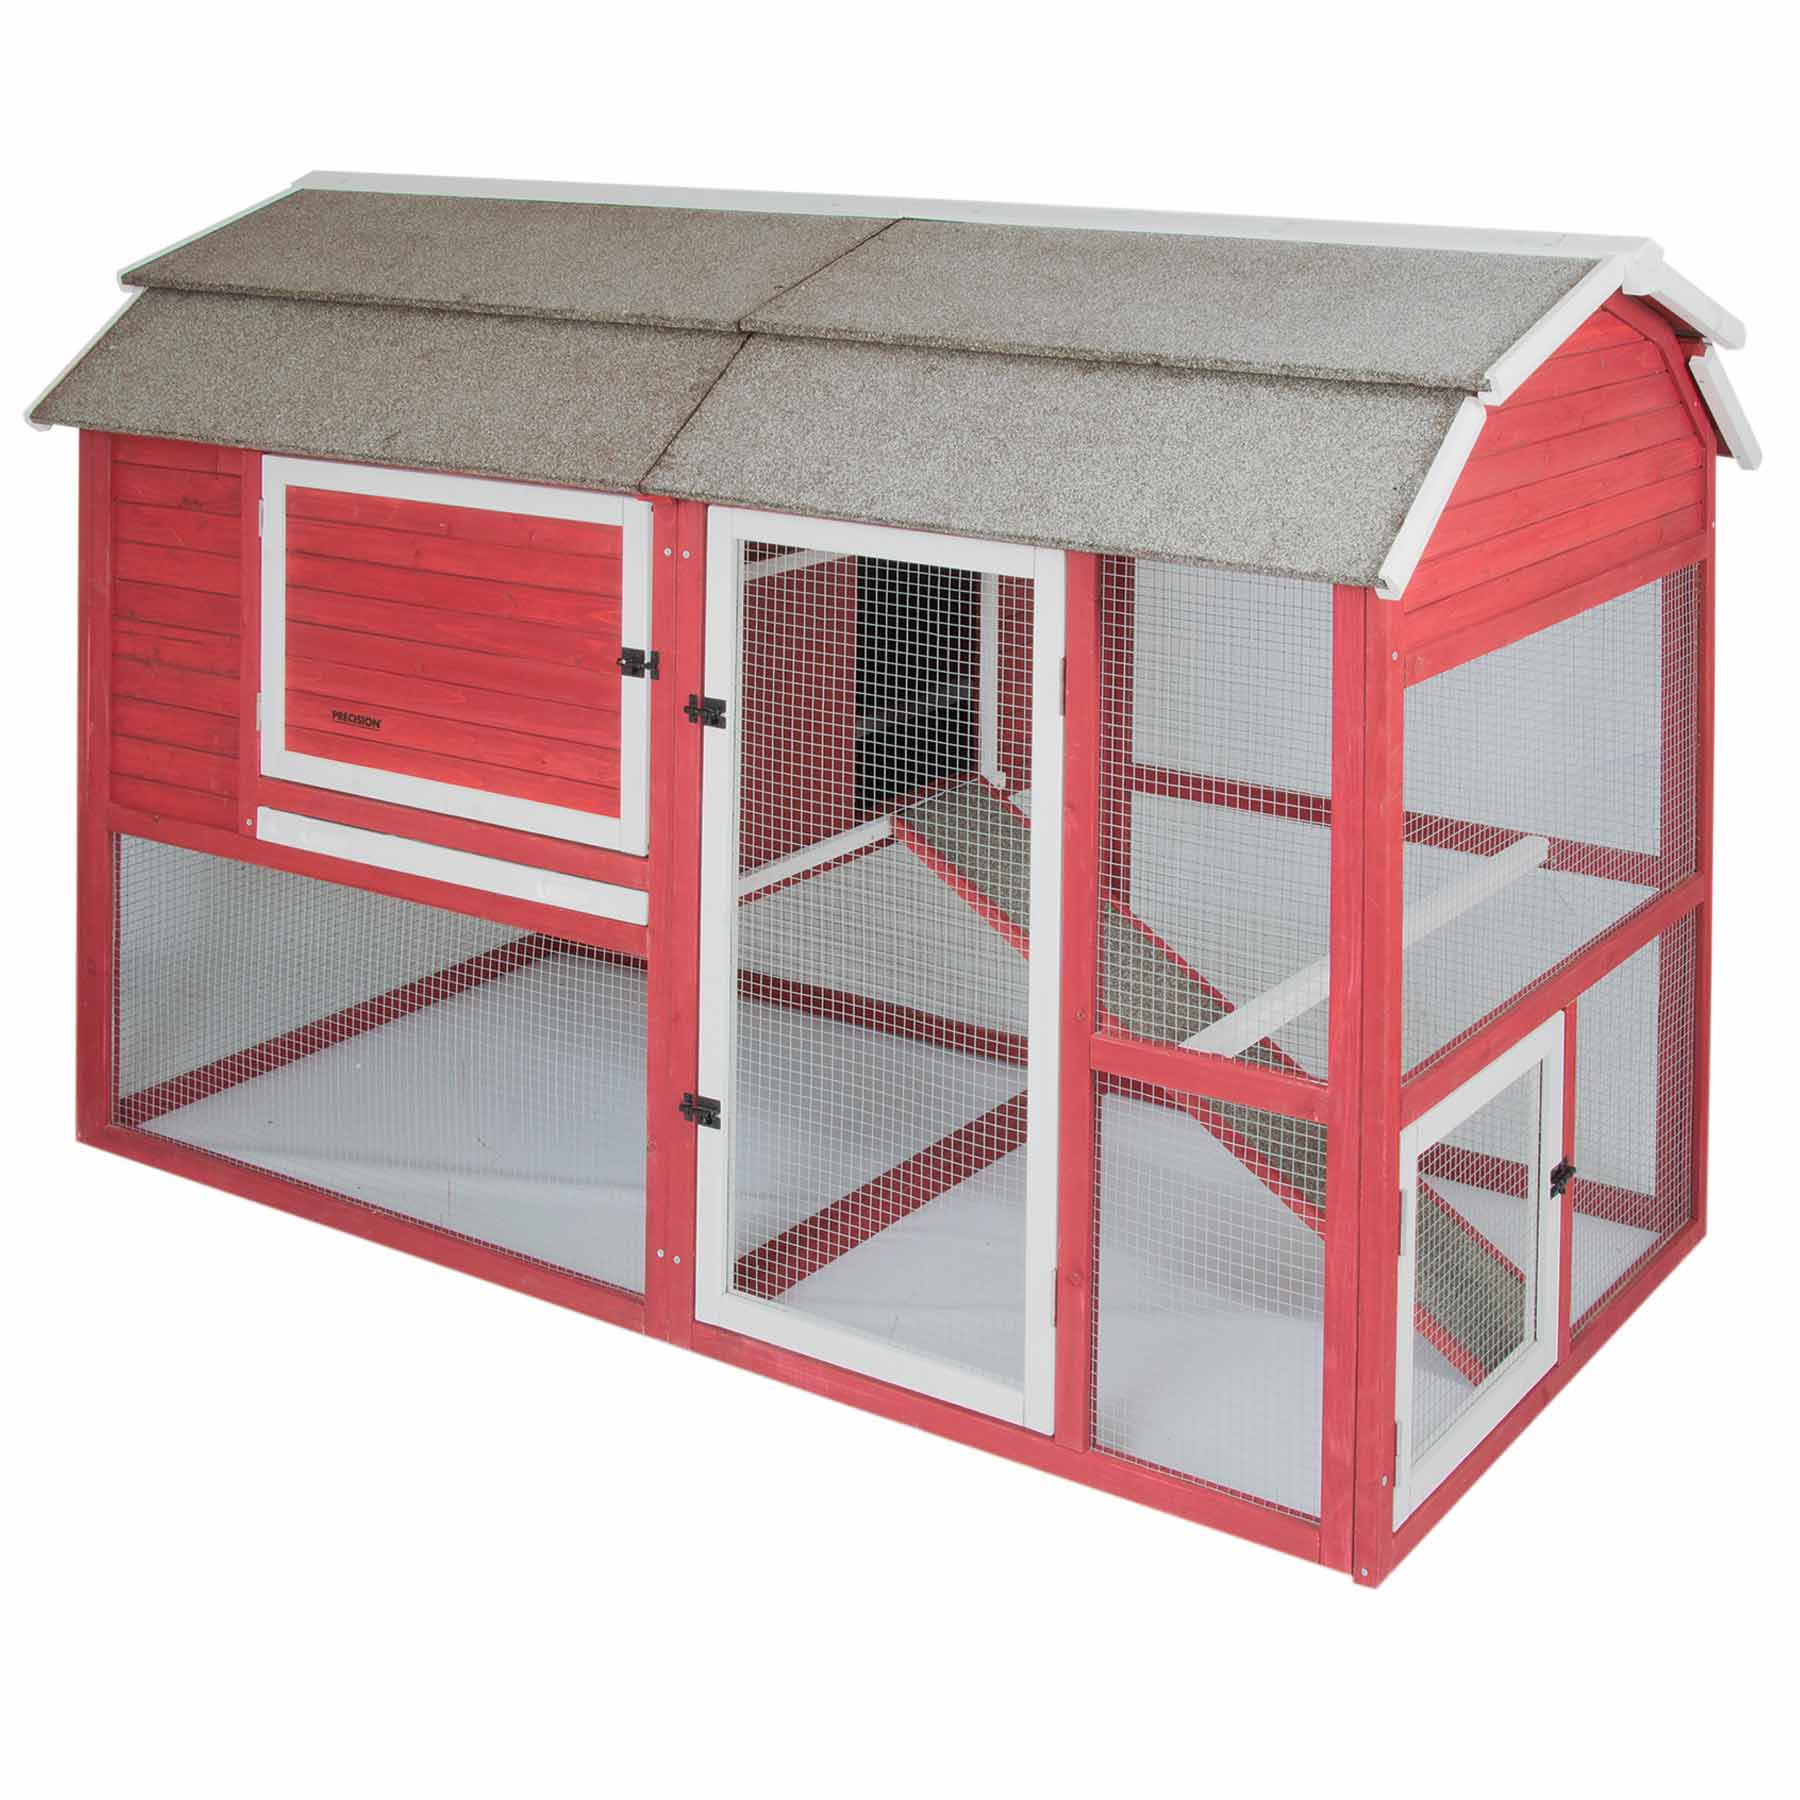 Precision Pet Old Red Barn II Chicken Coop